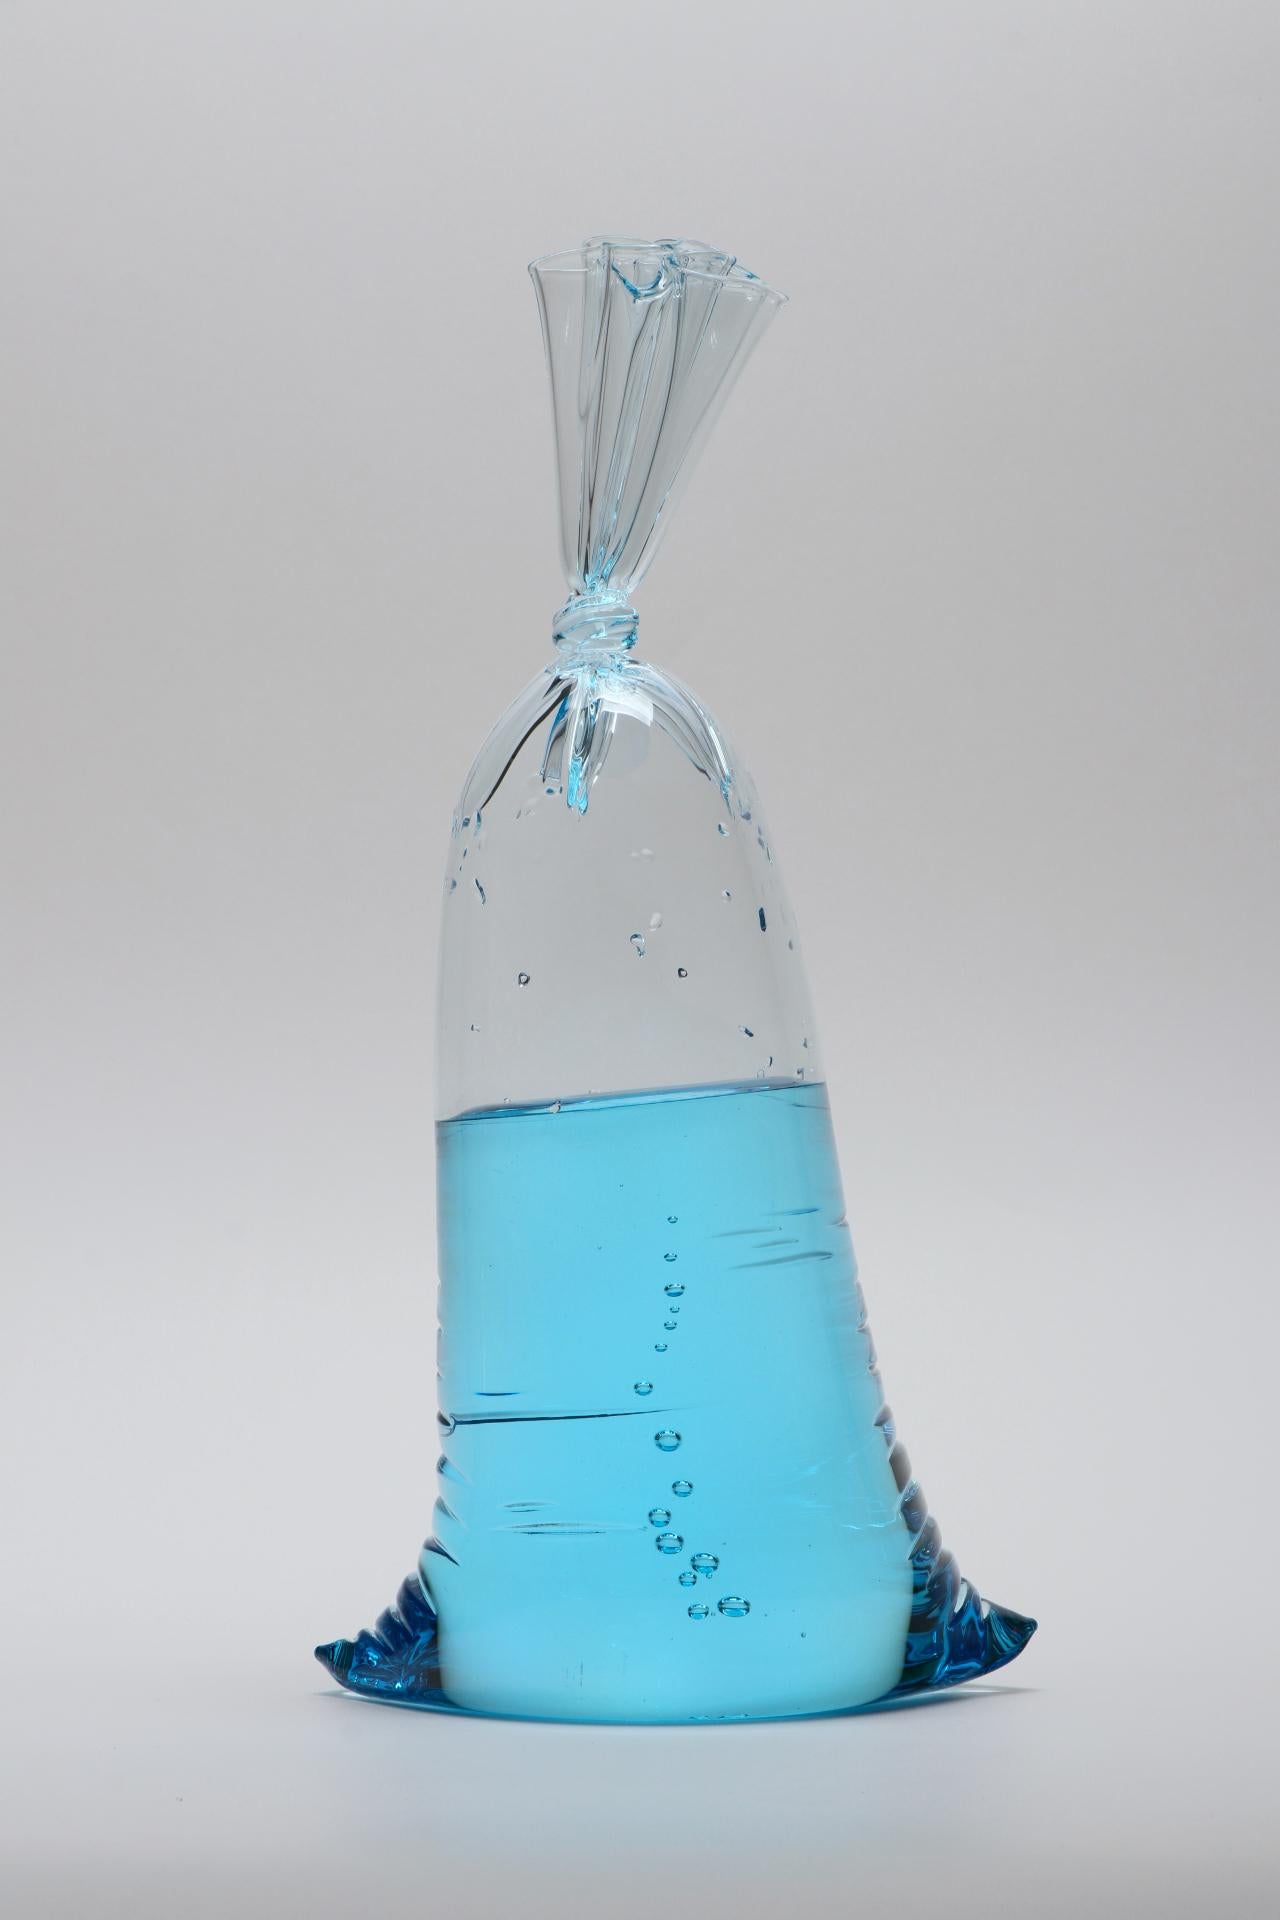 American Hyperreal blue glass water bag trio sculpture installation For Sale